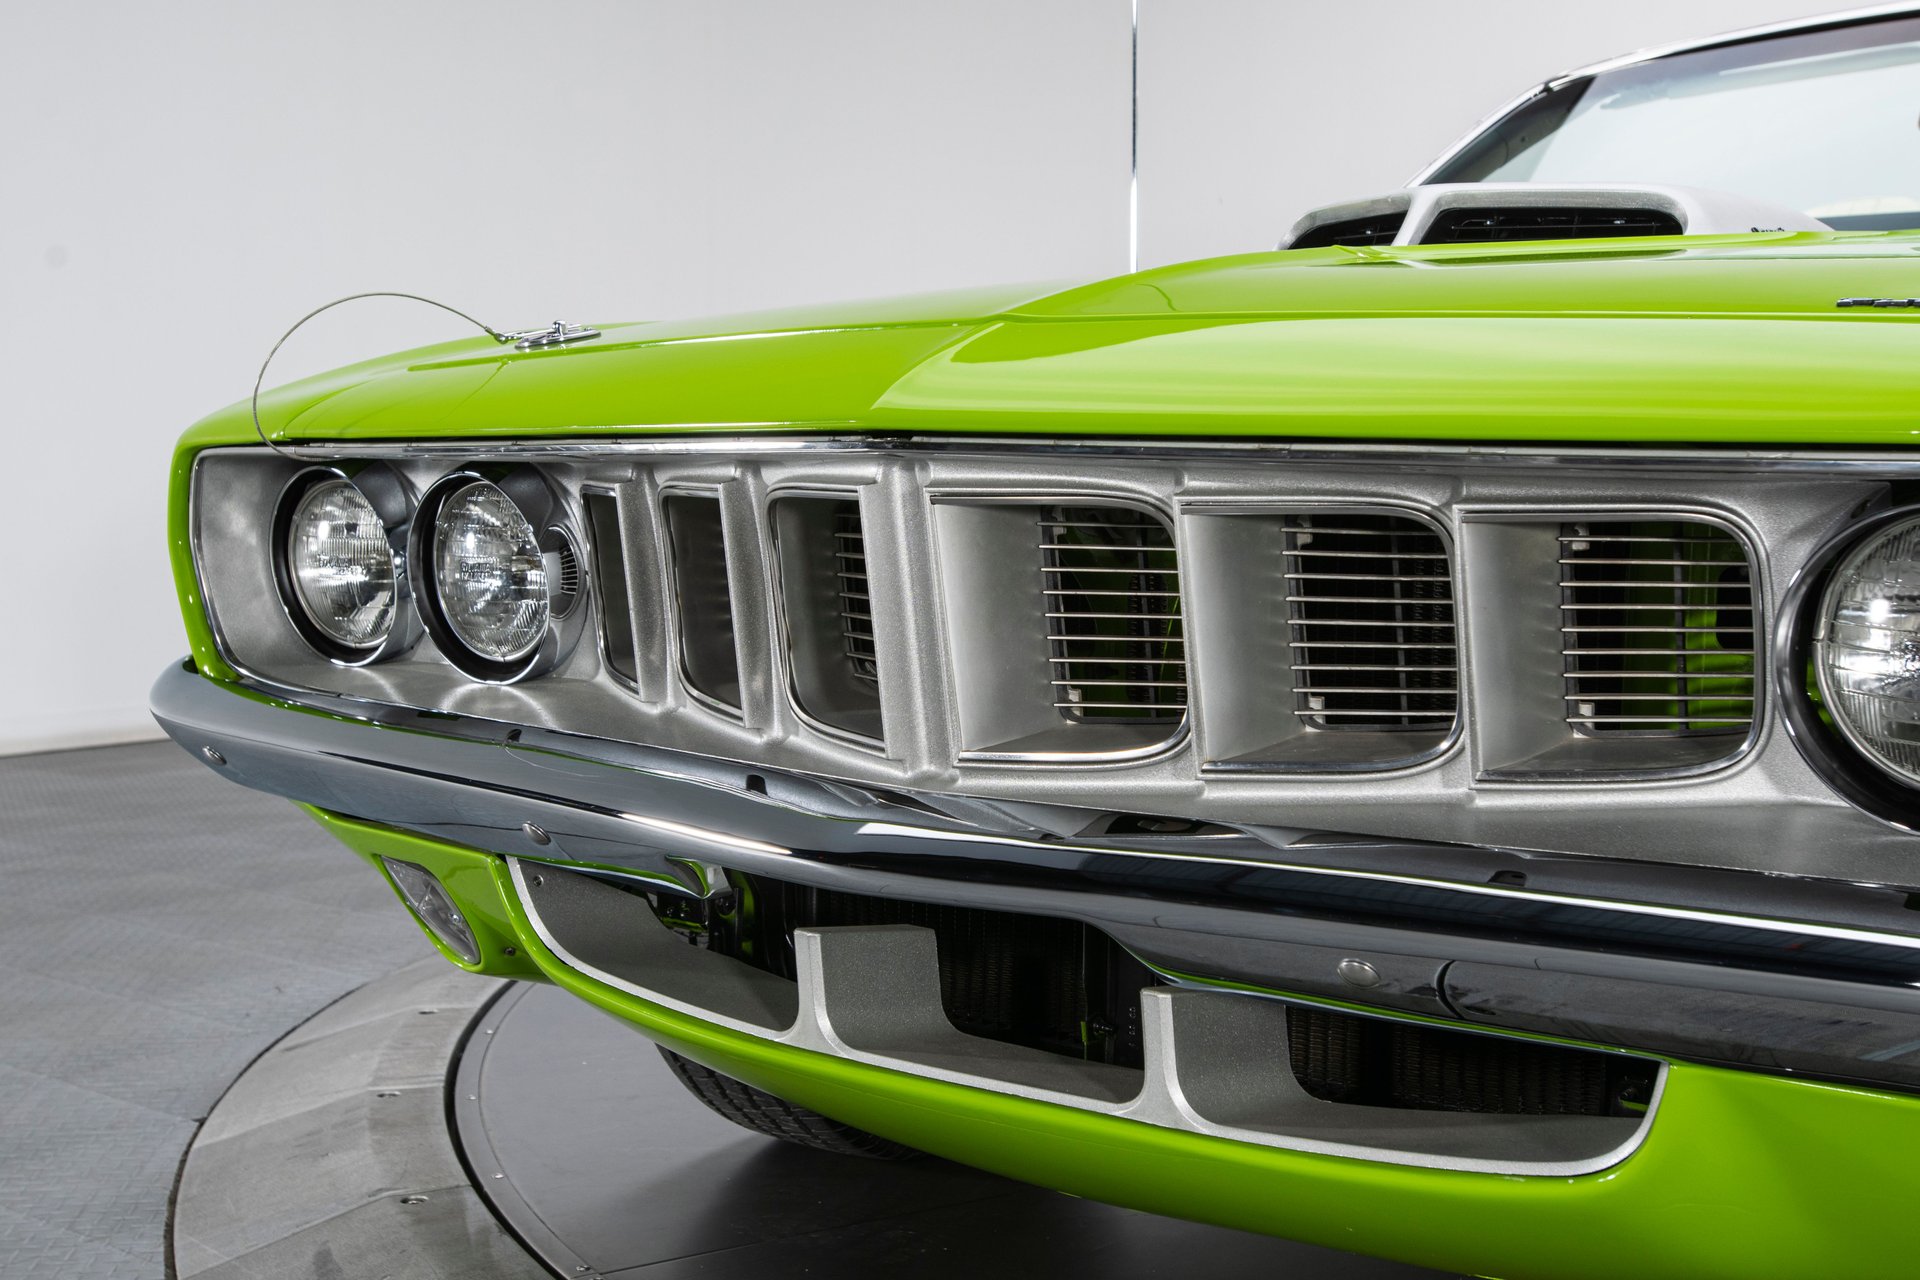 For Sale 1970 Plymouth Barracuda